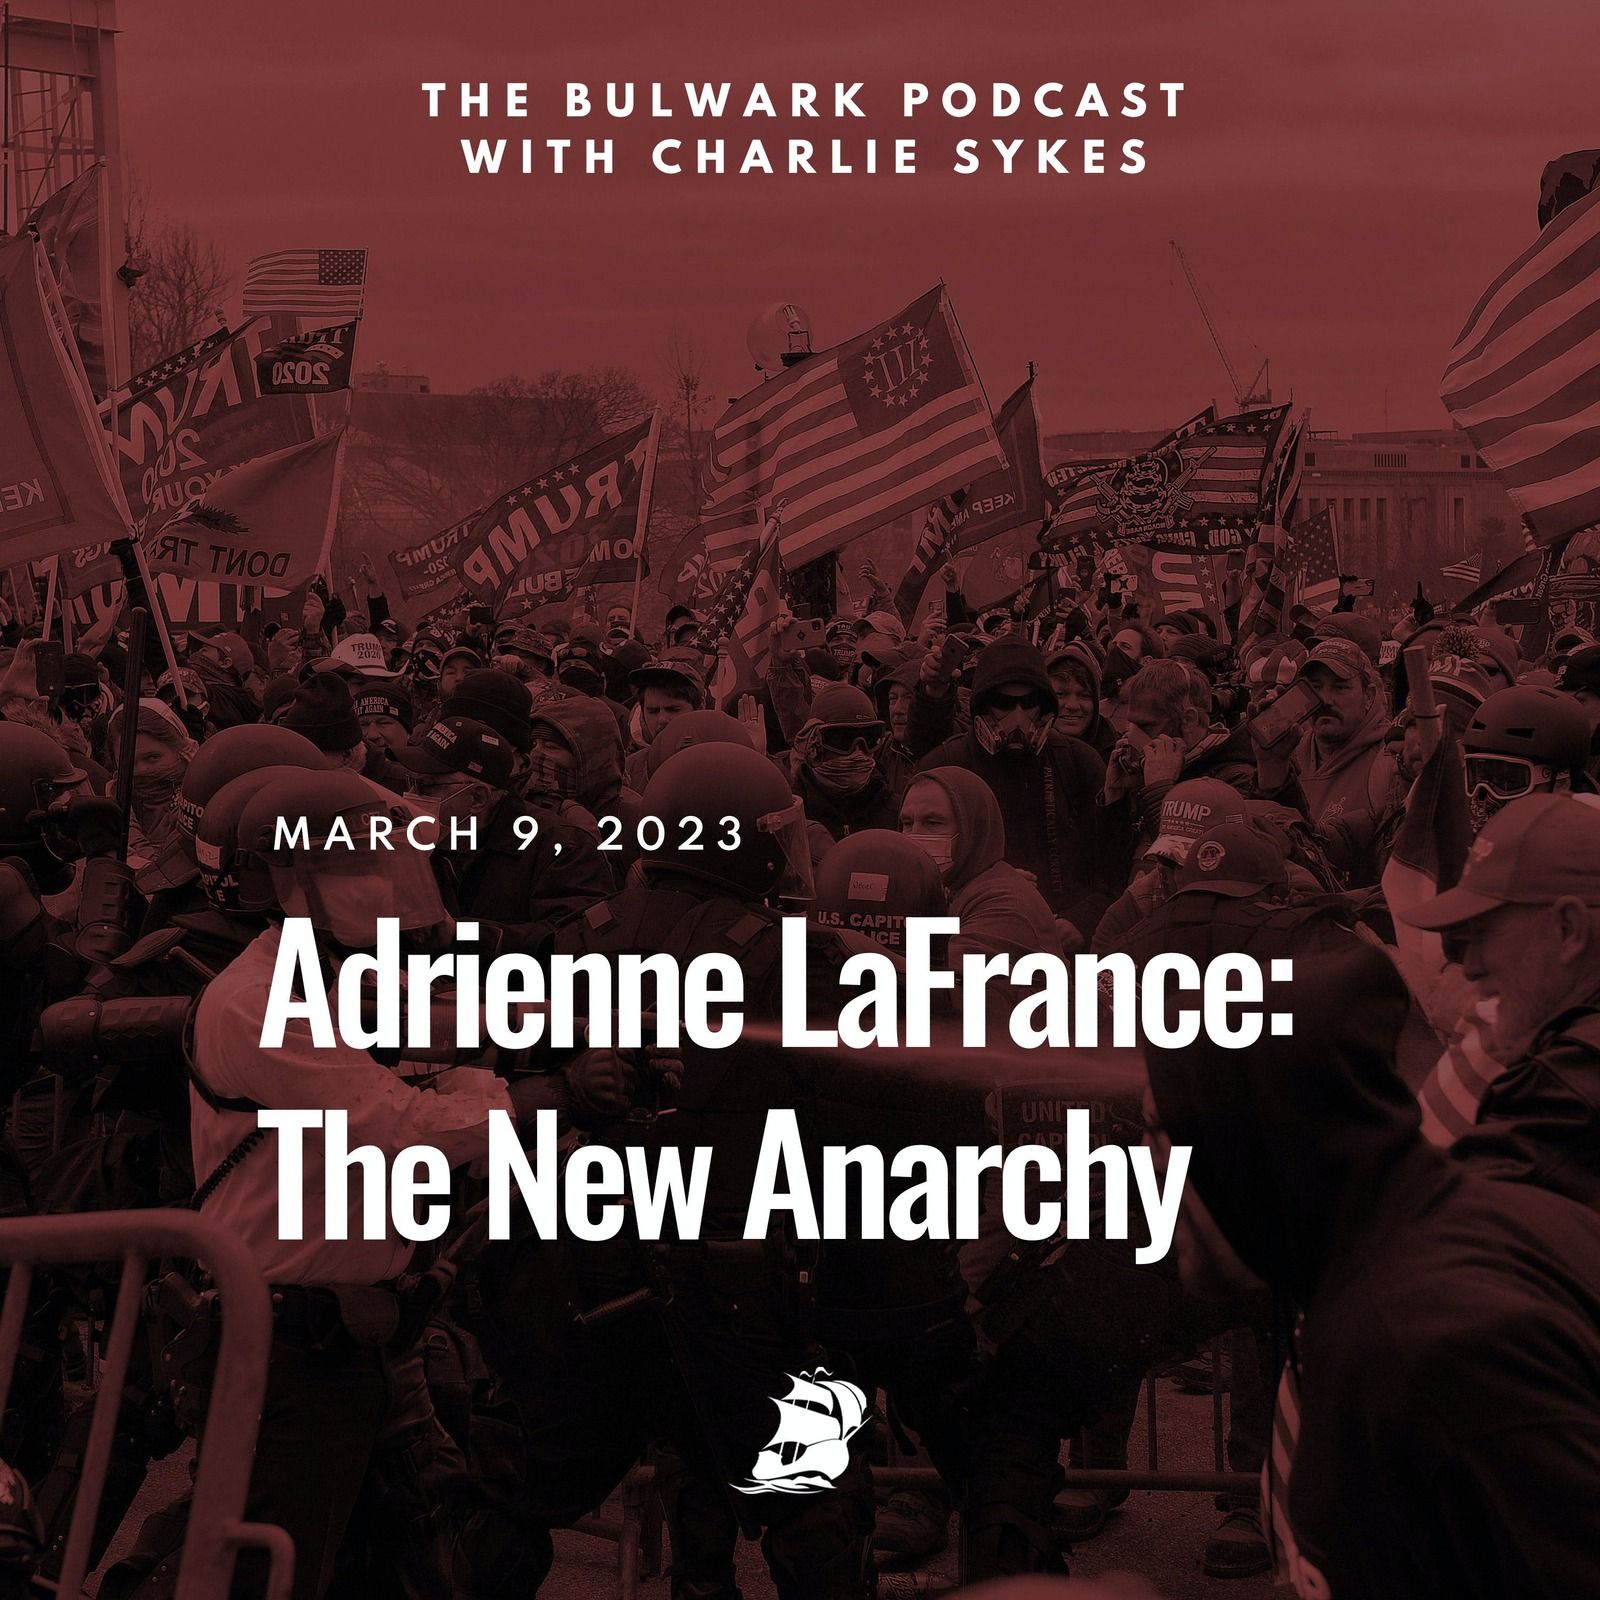 Adrienne LaFrance: The New Anarchy by The Bulwark Podcast